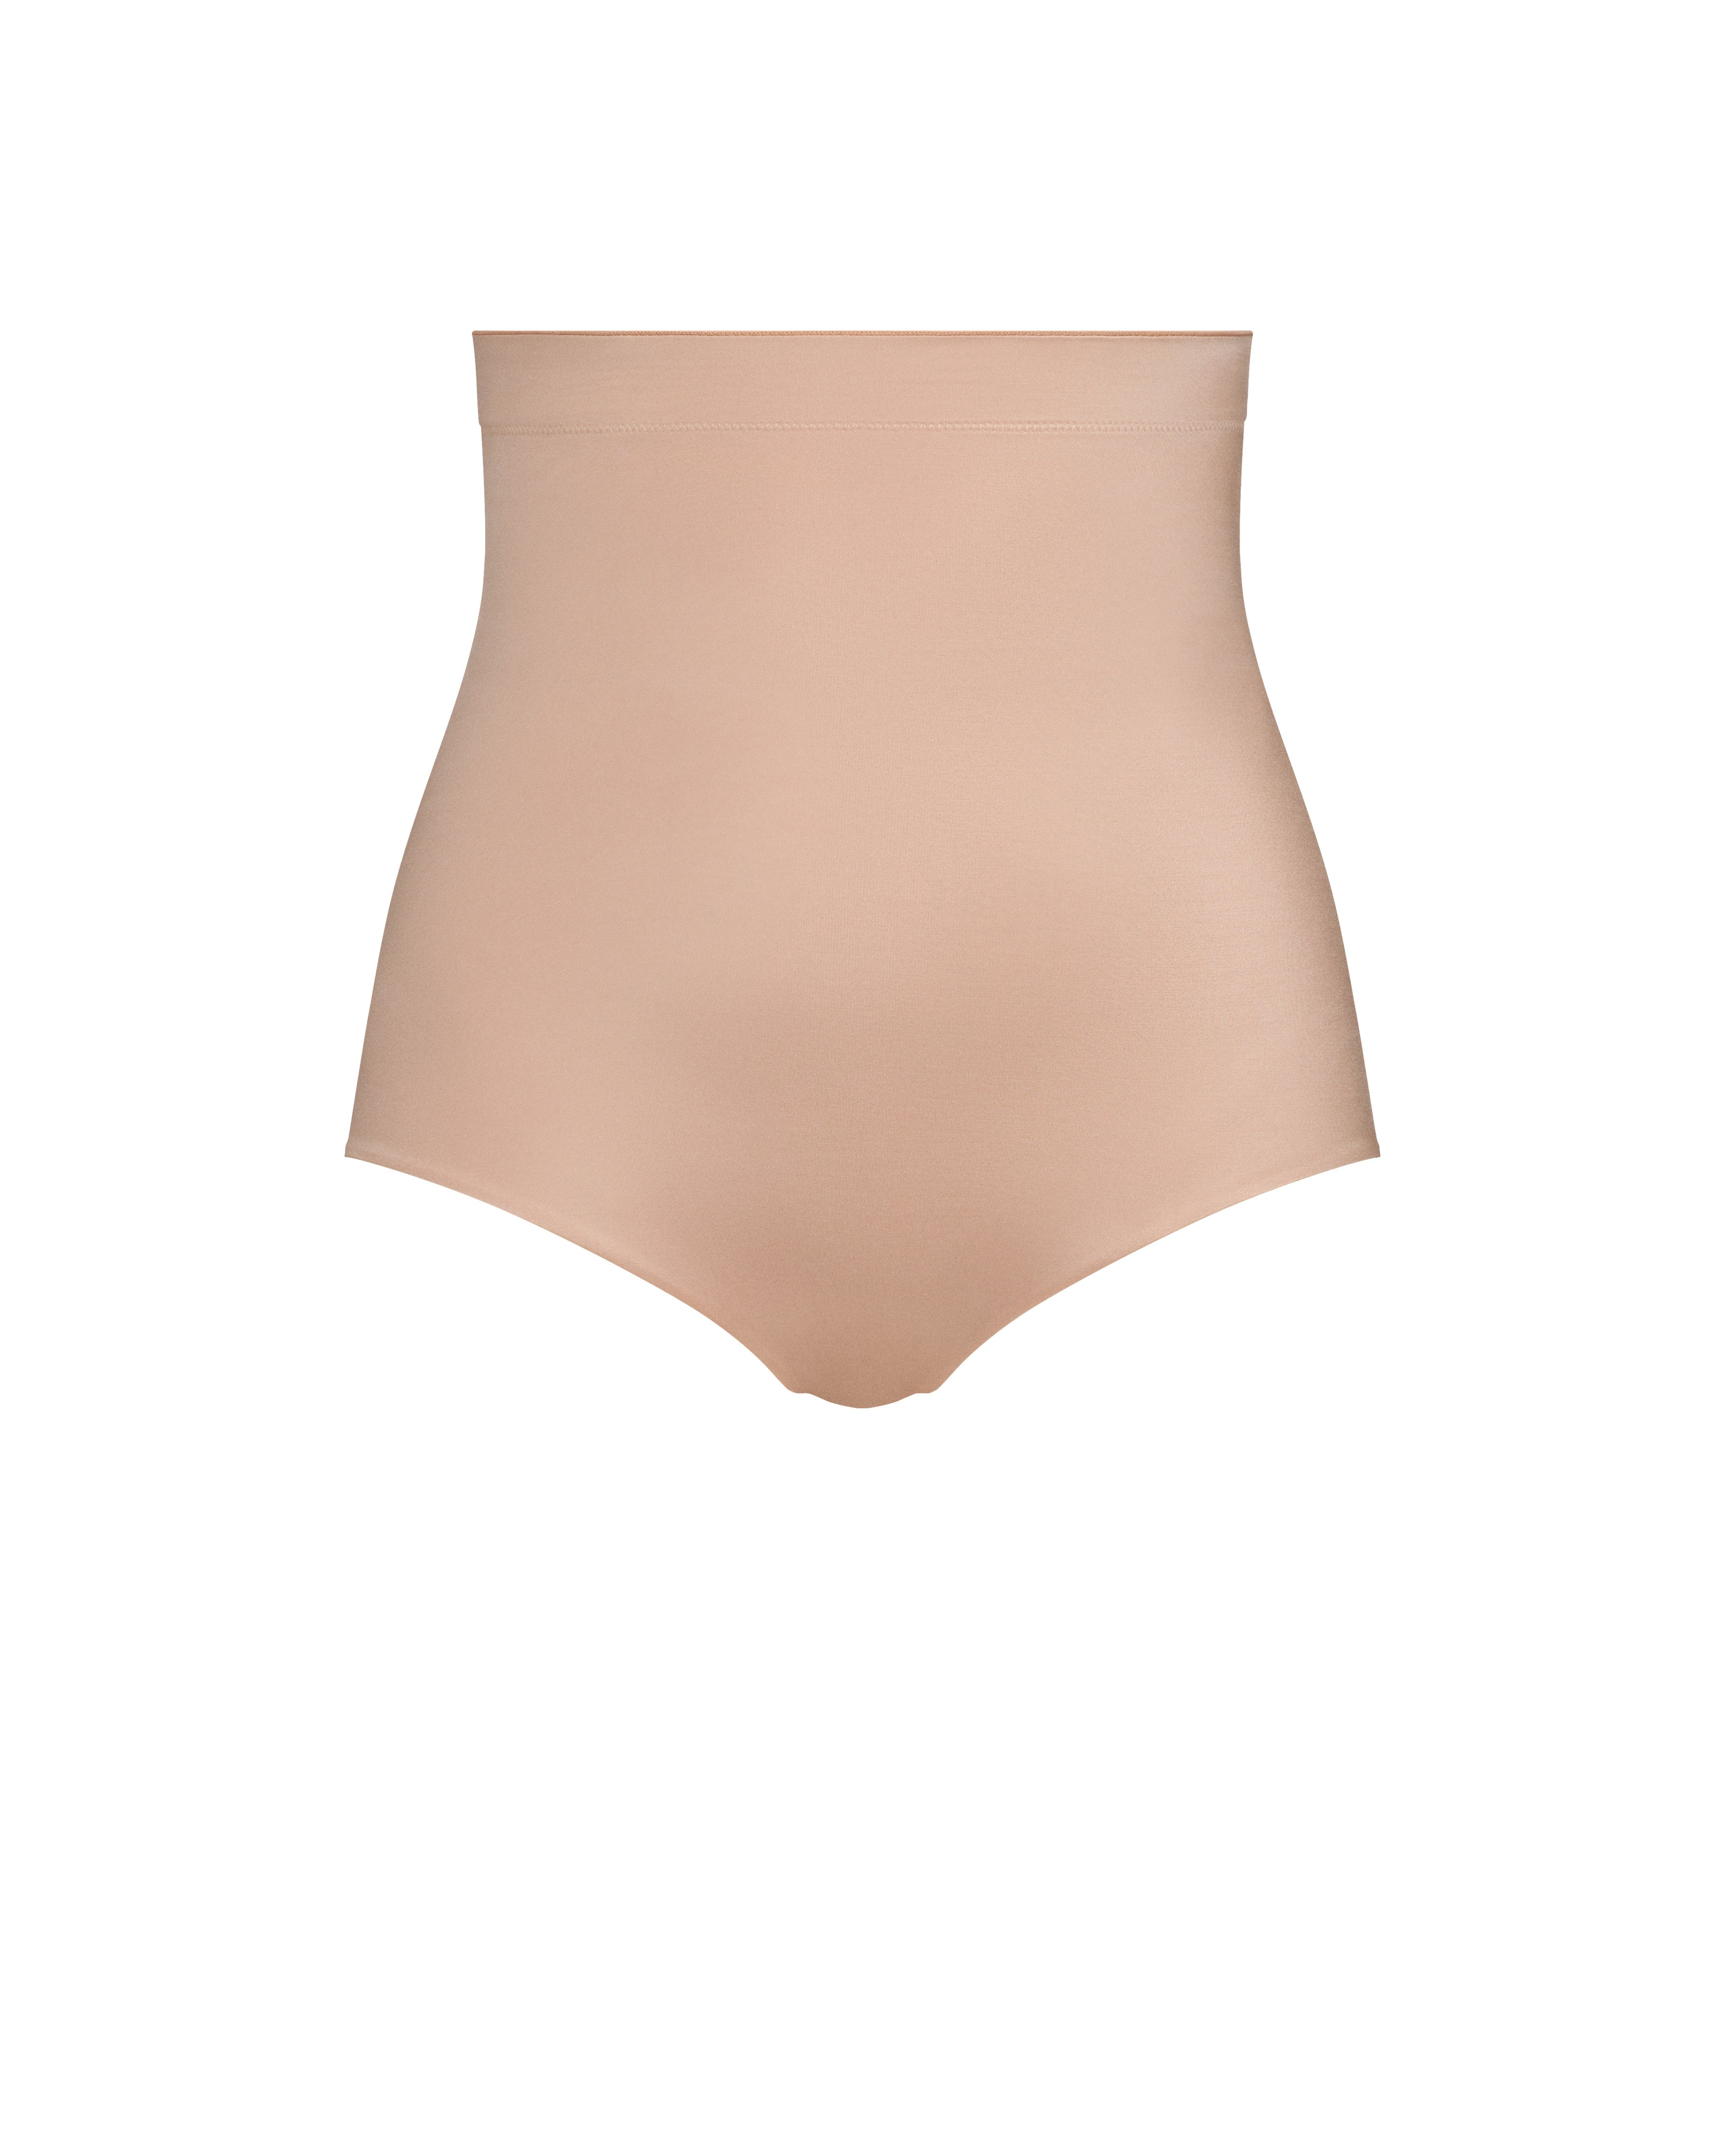 SUIT YOUR FANCY High Waist Thong in Champagne Beige – Christina's